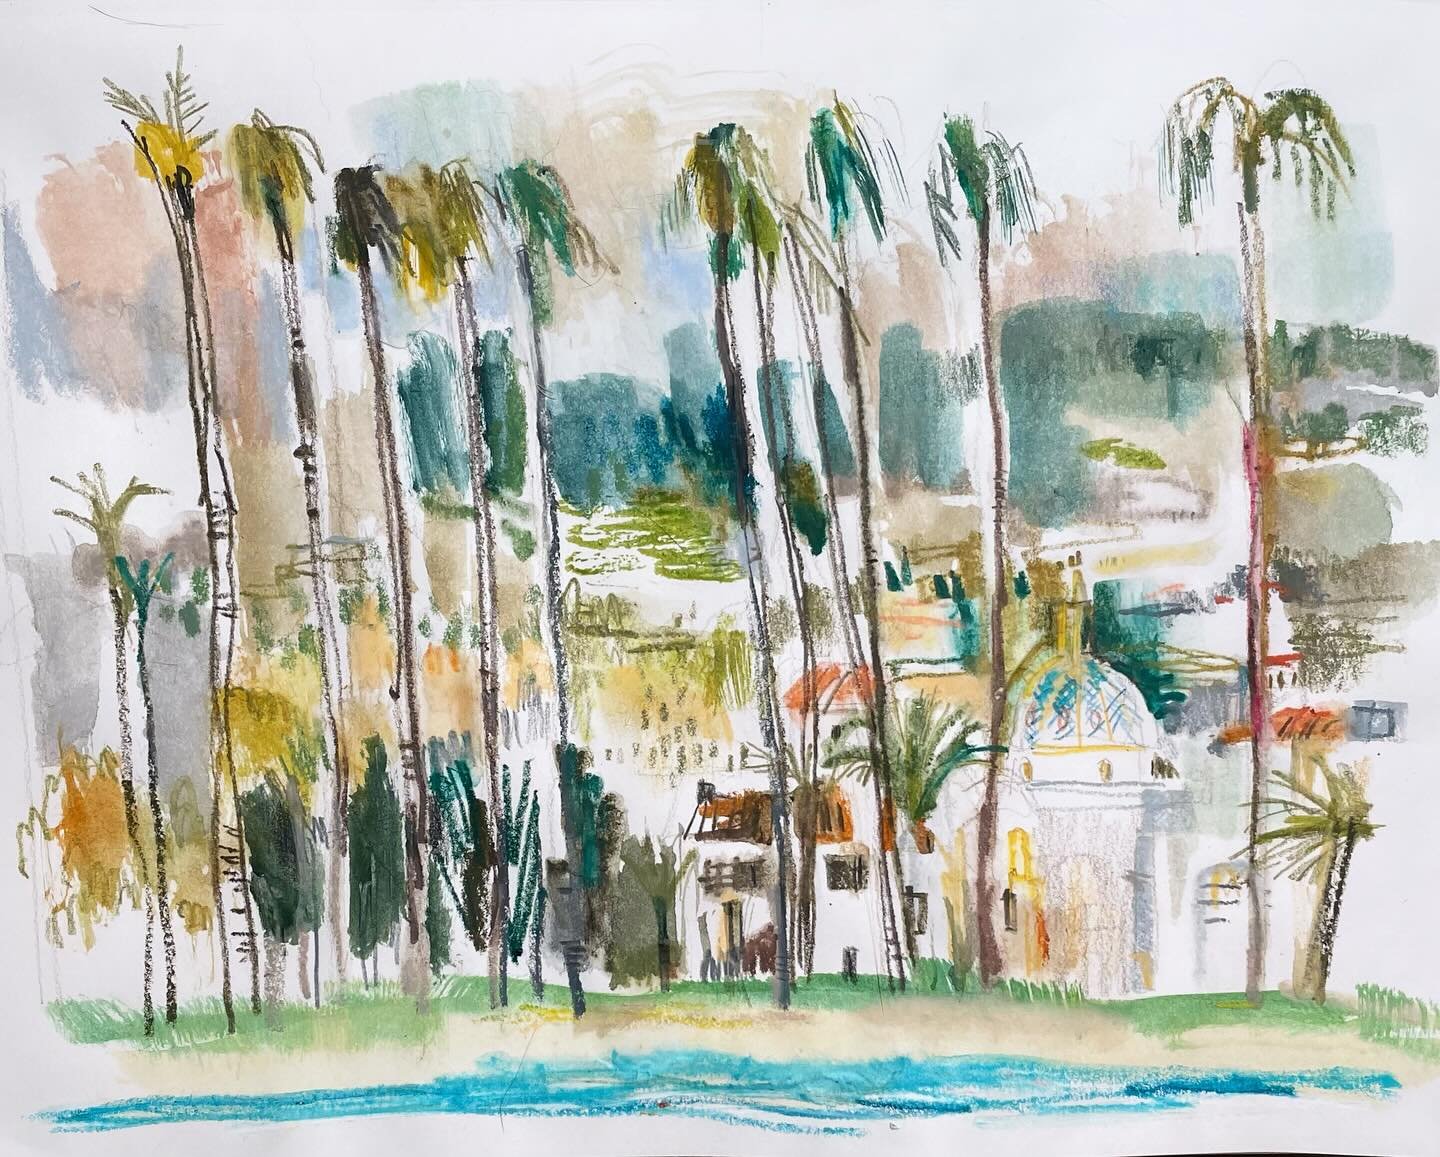 Today&rsquo;s post: California palms. Something about those palm trees always get me. This reference was from a travel magazine I found on the plane. 
#santabarabara #california #californiapalms #palmtrees #palms #landscapes #californialandscape #cal